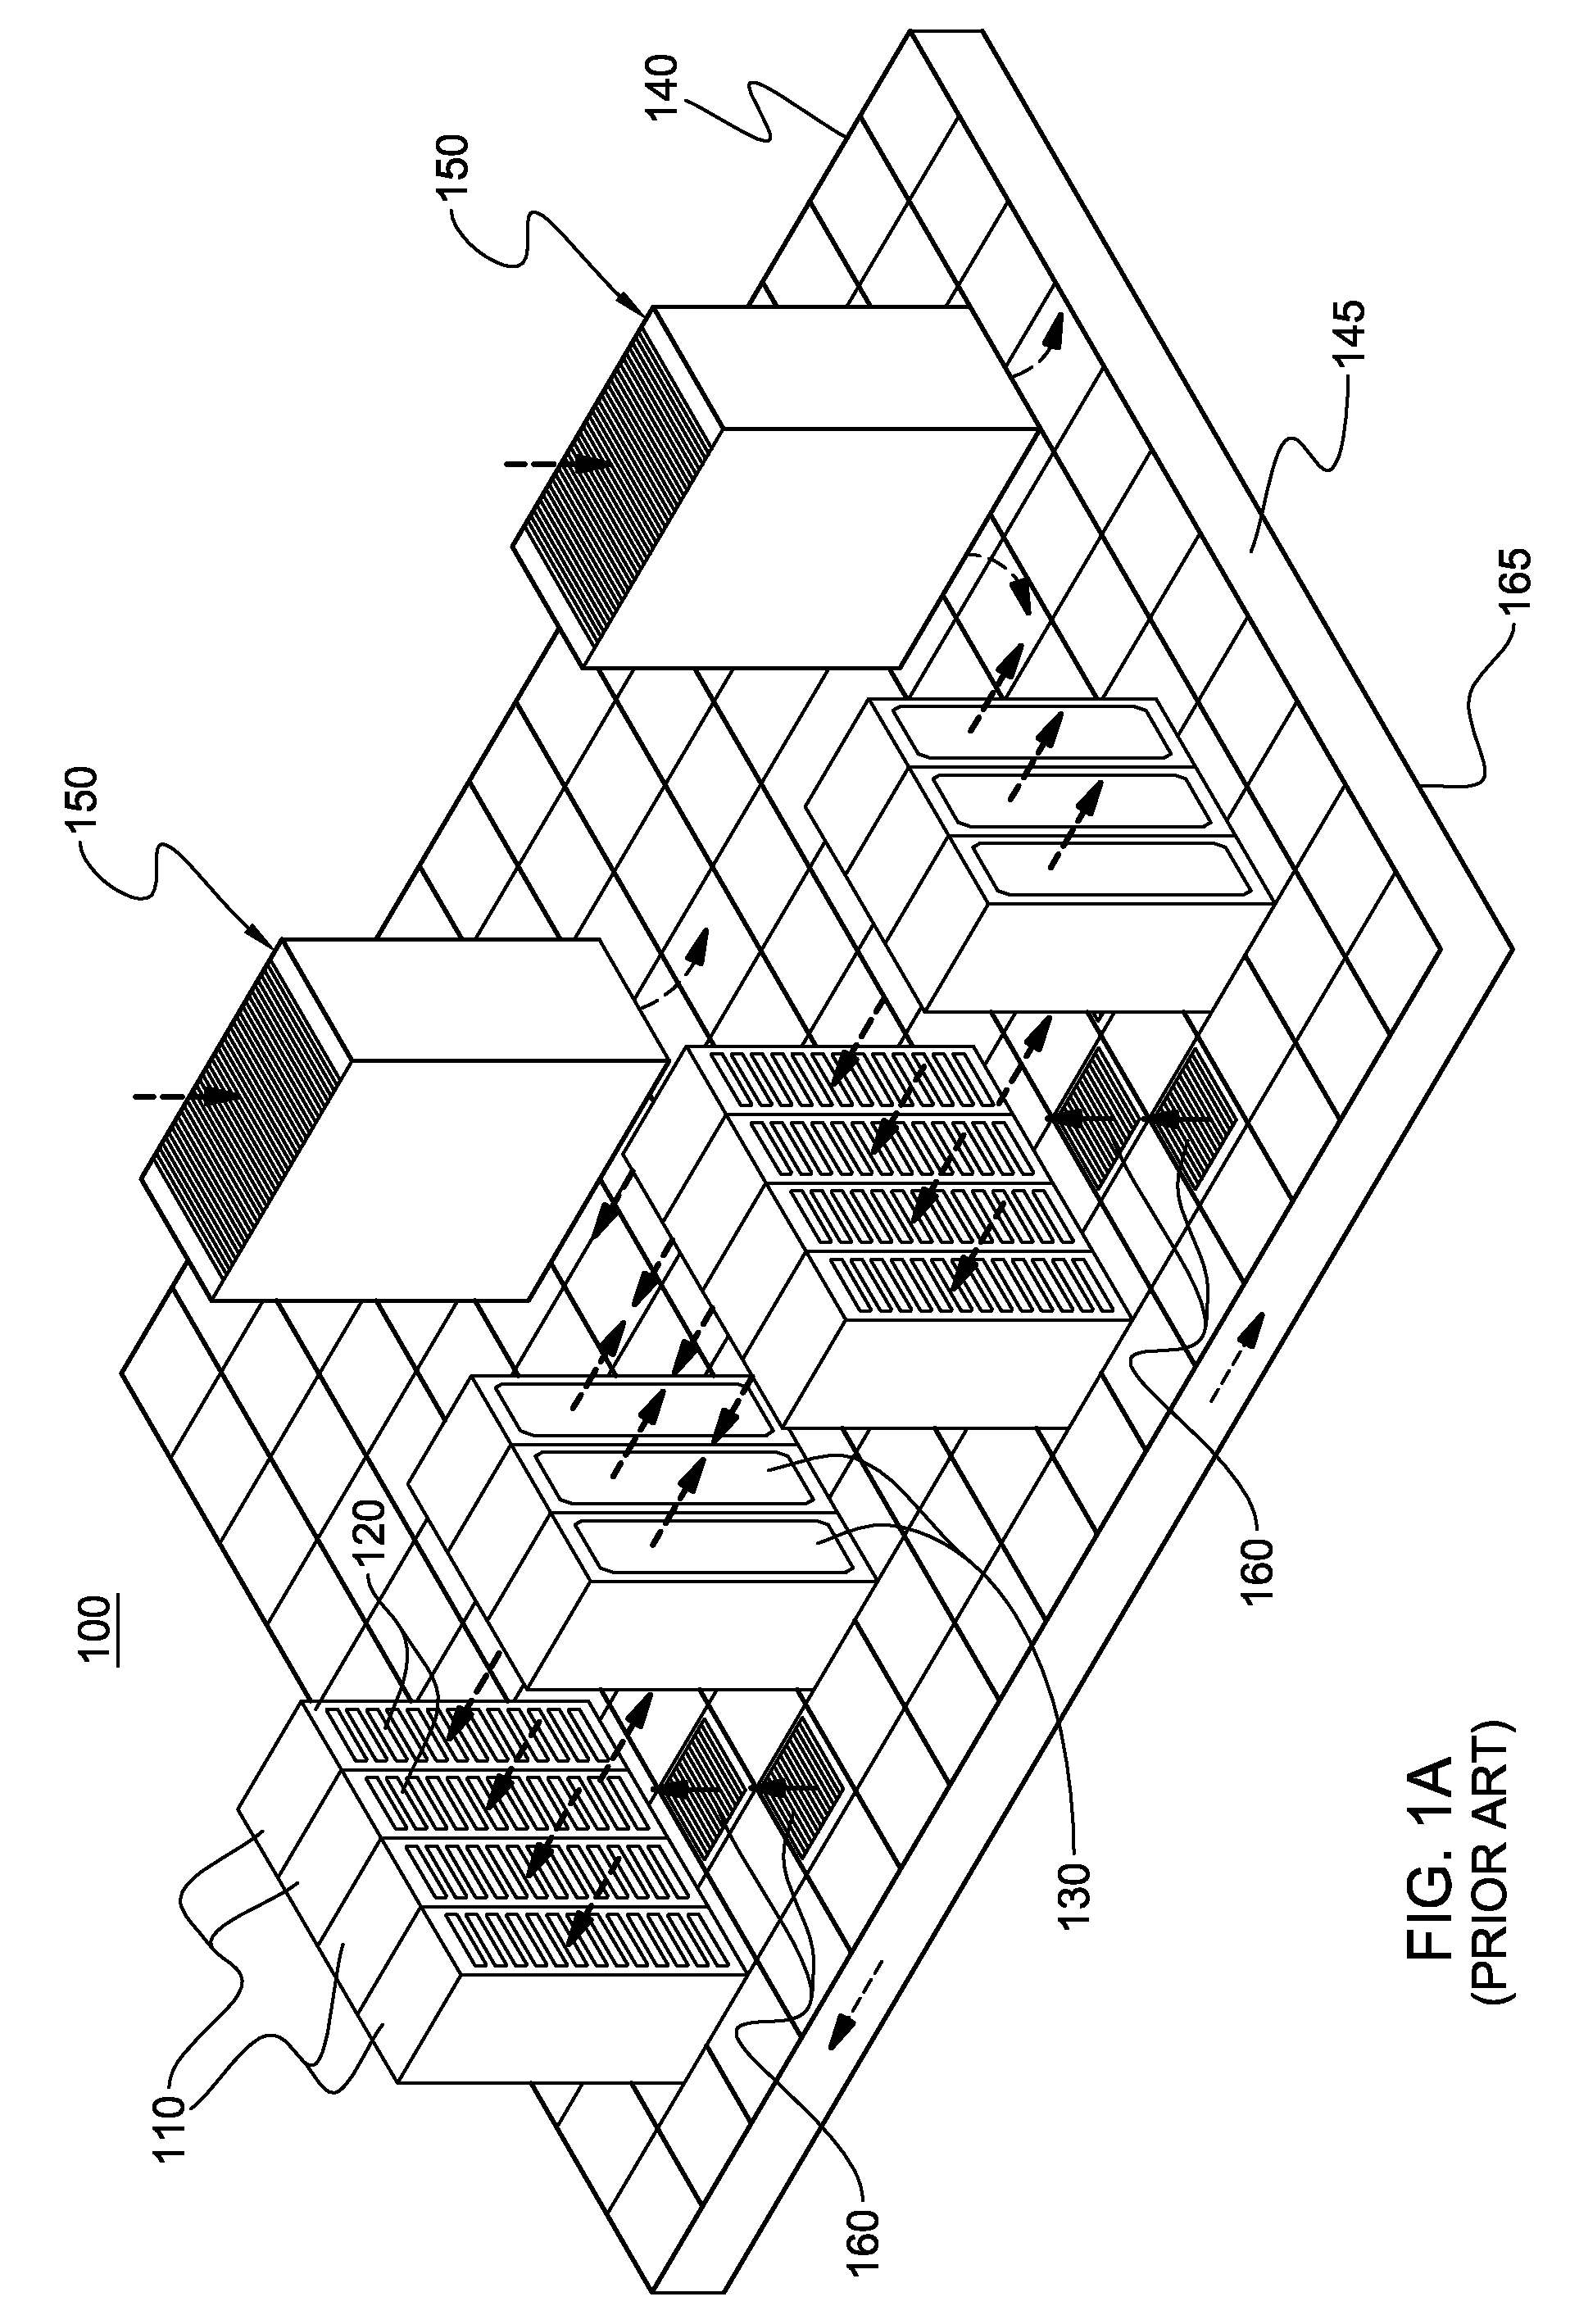 Docking station with hybrid air and liquid cooling of an electronics rack